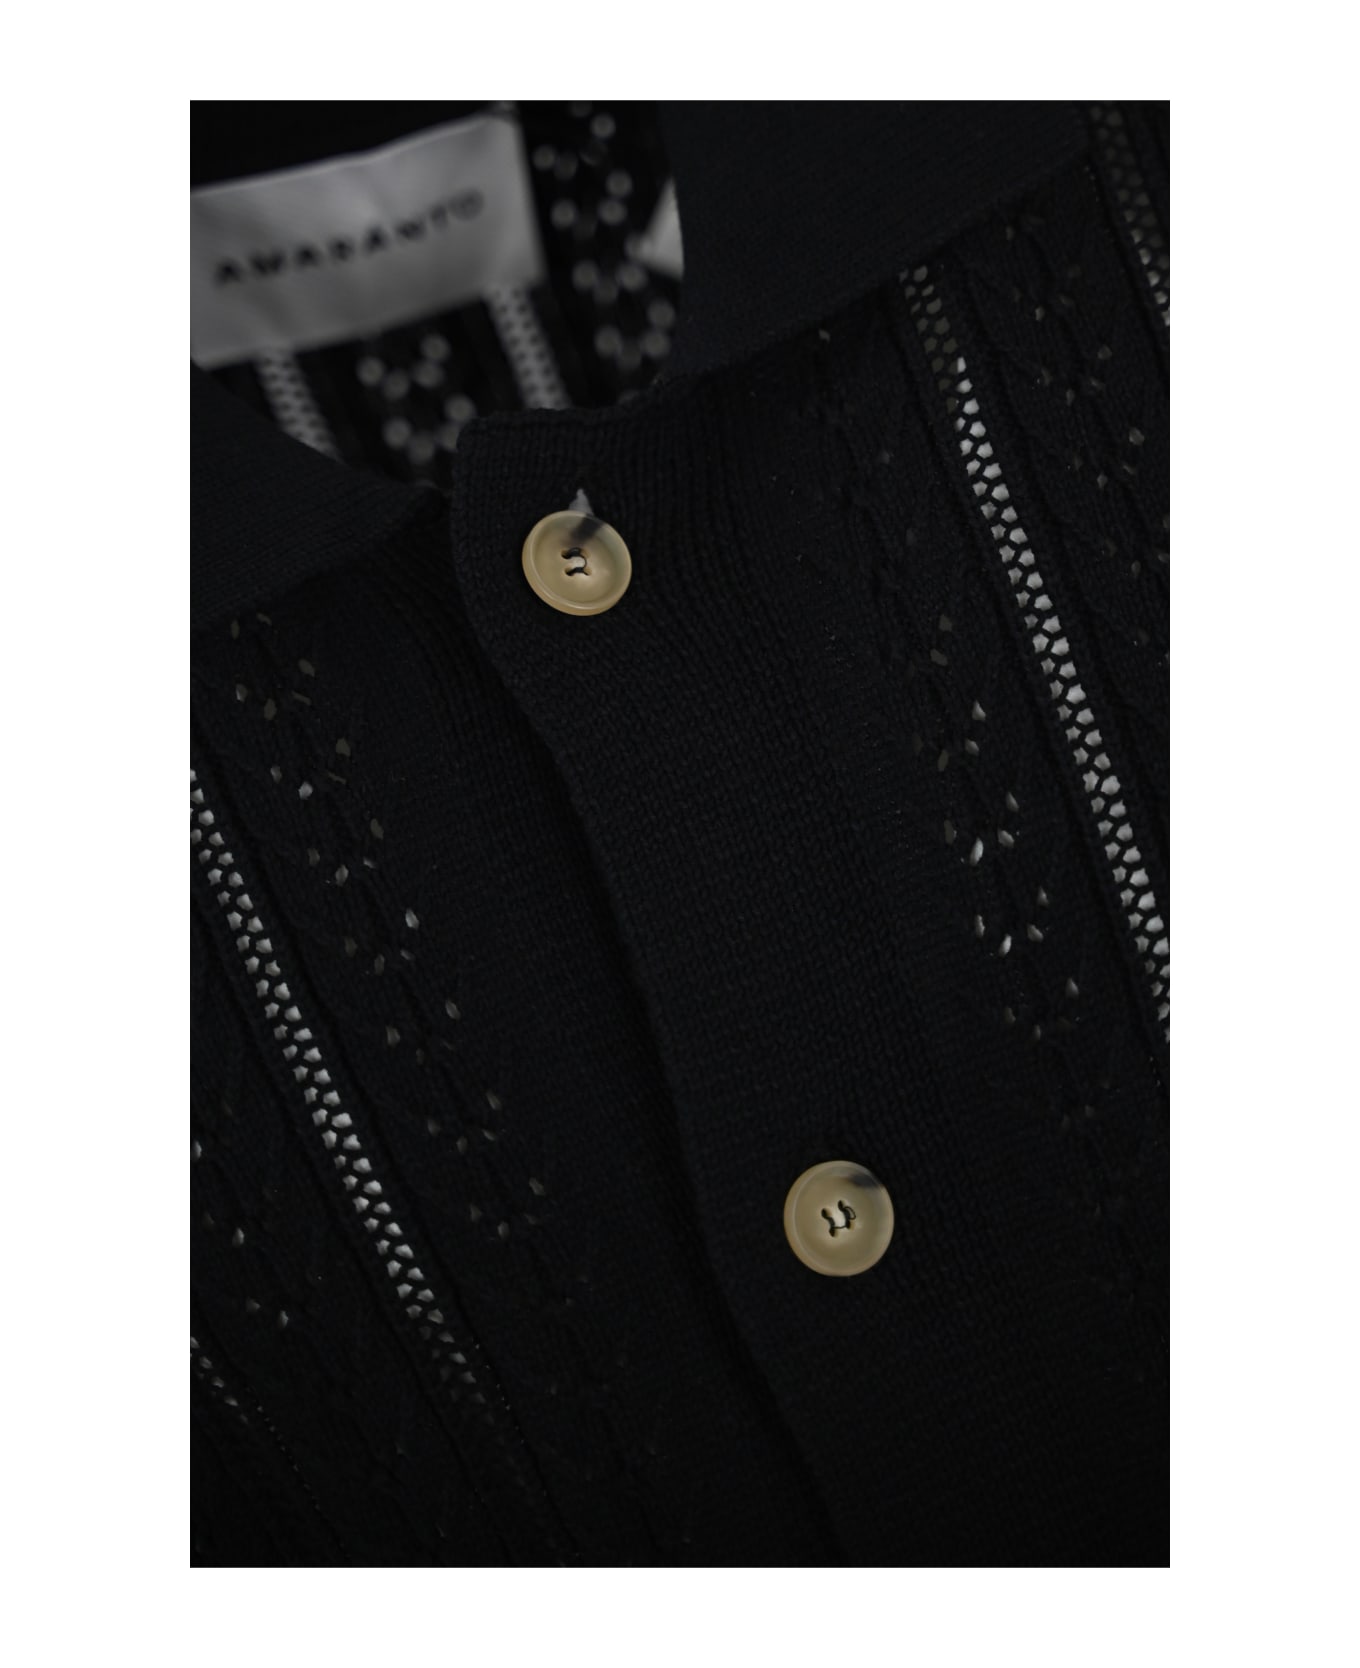 Amaranto <strong>perforated Shirt</strong><strong></strong> - Nero